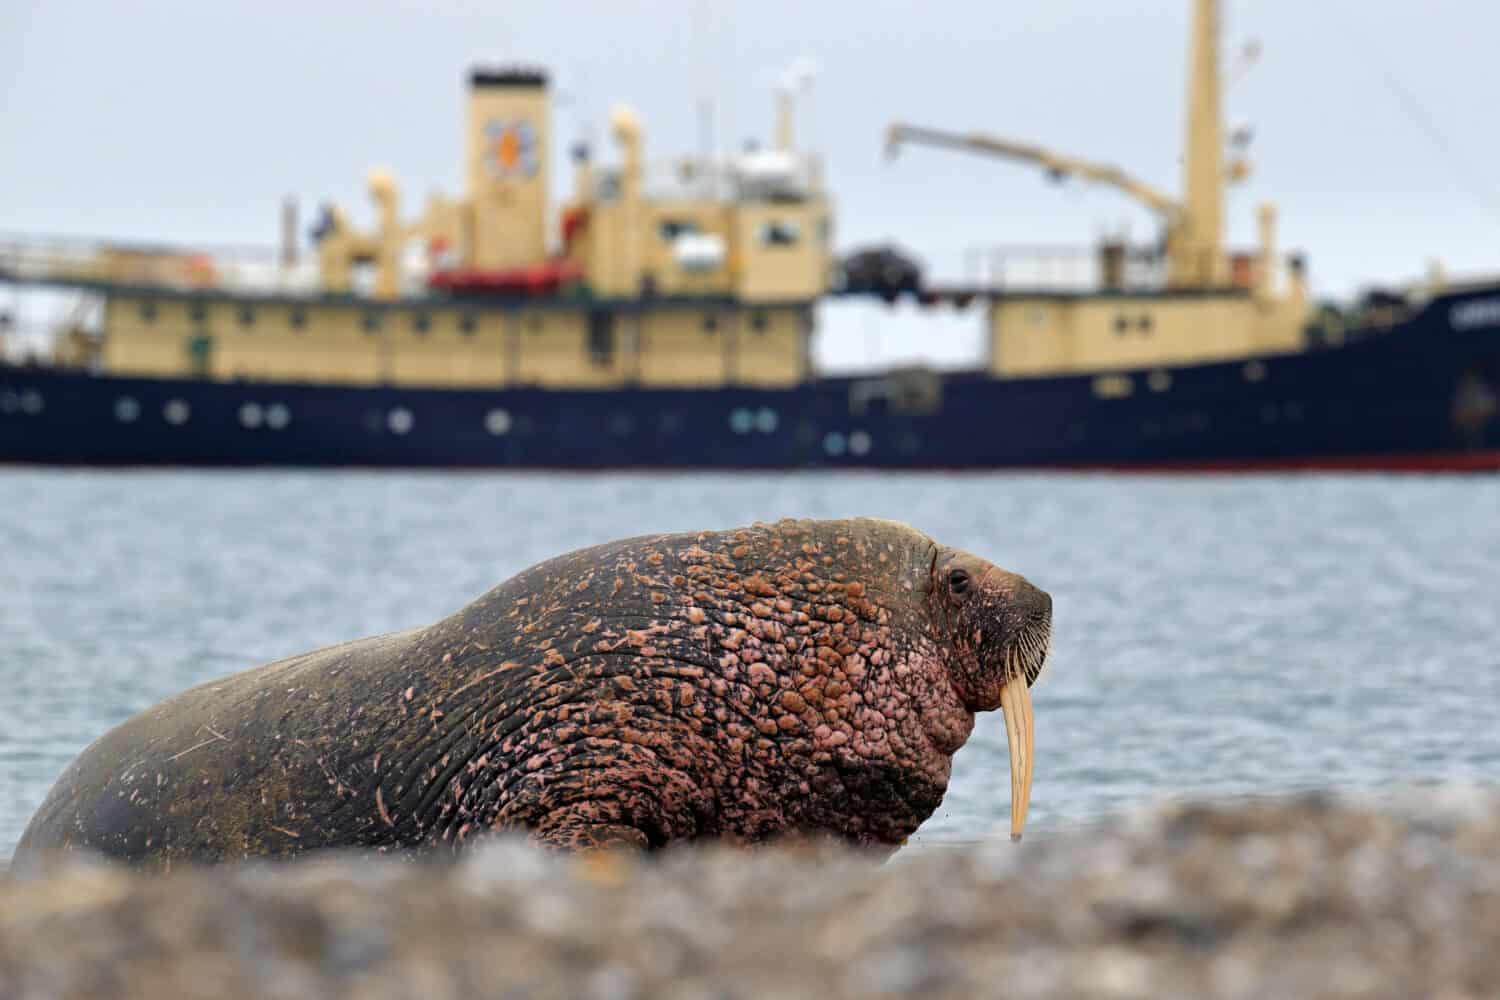 Walrus on the sand beach and boat. Detail portrait of Walrus with big white tusk, Odobenus rosmarus, big animal in nature habitat on Svalbard, Norway. Vessel and big animal on the beach.